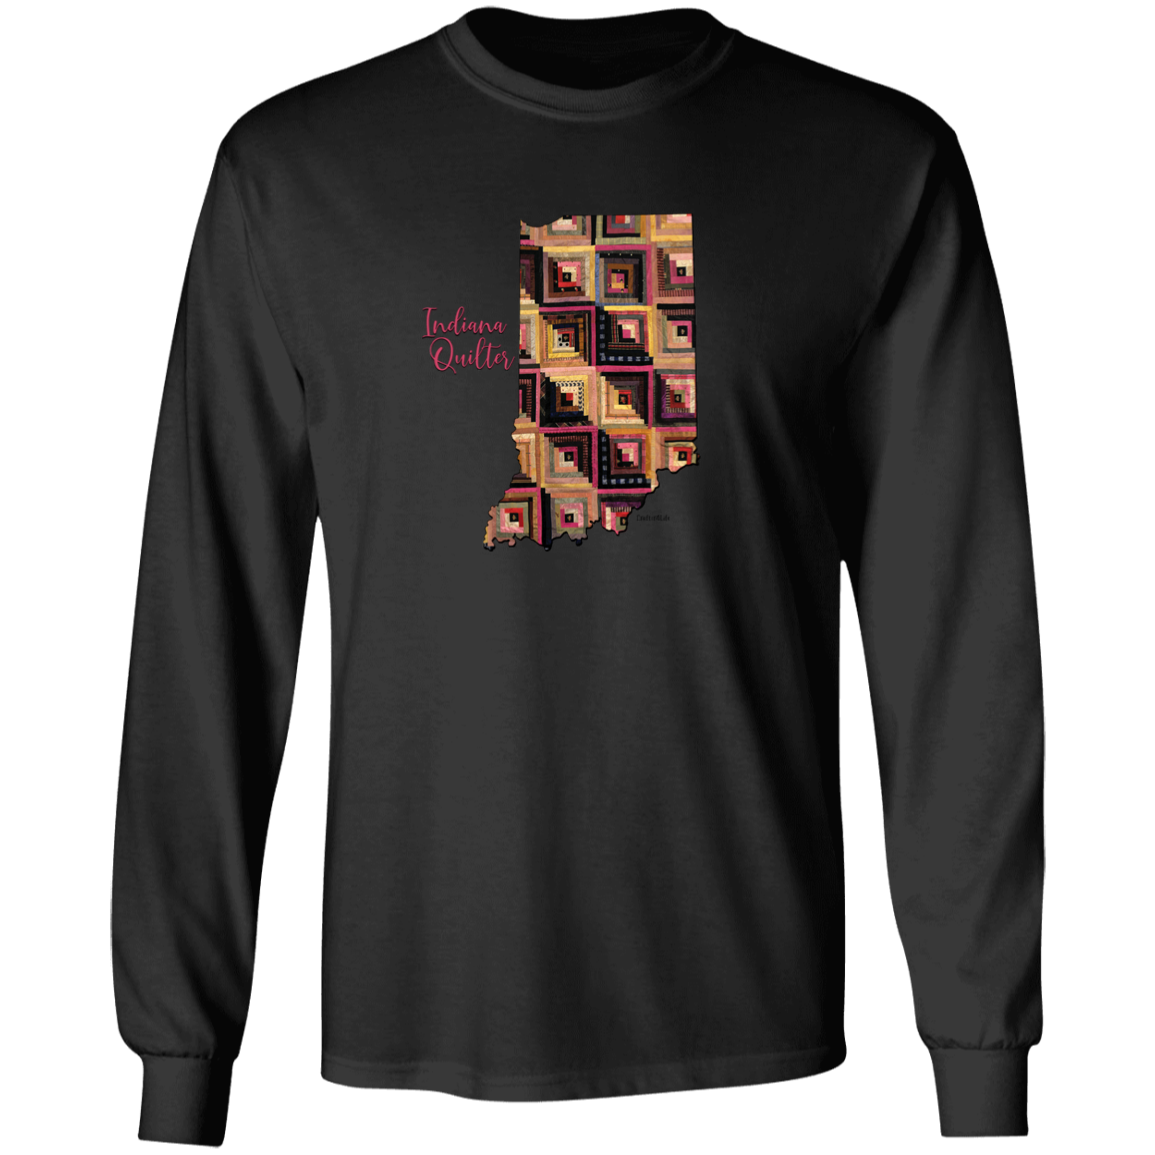 Indiana Quilter Long Sleeve T-Shirt, Gift for Quilting Friends and Family